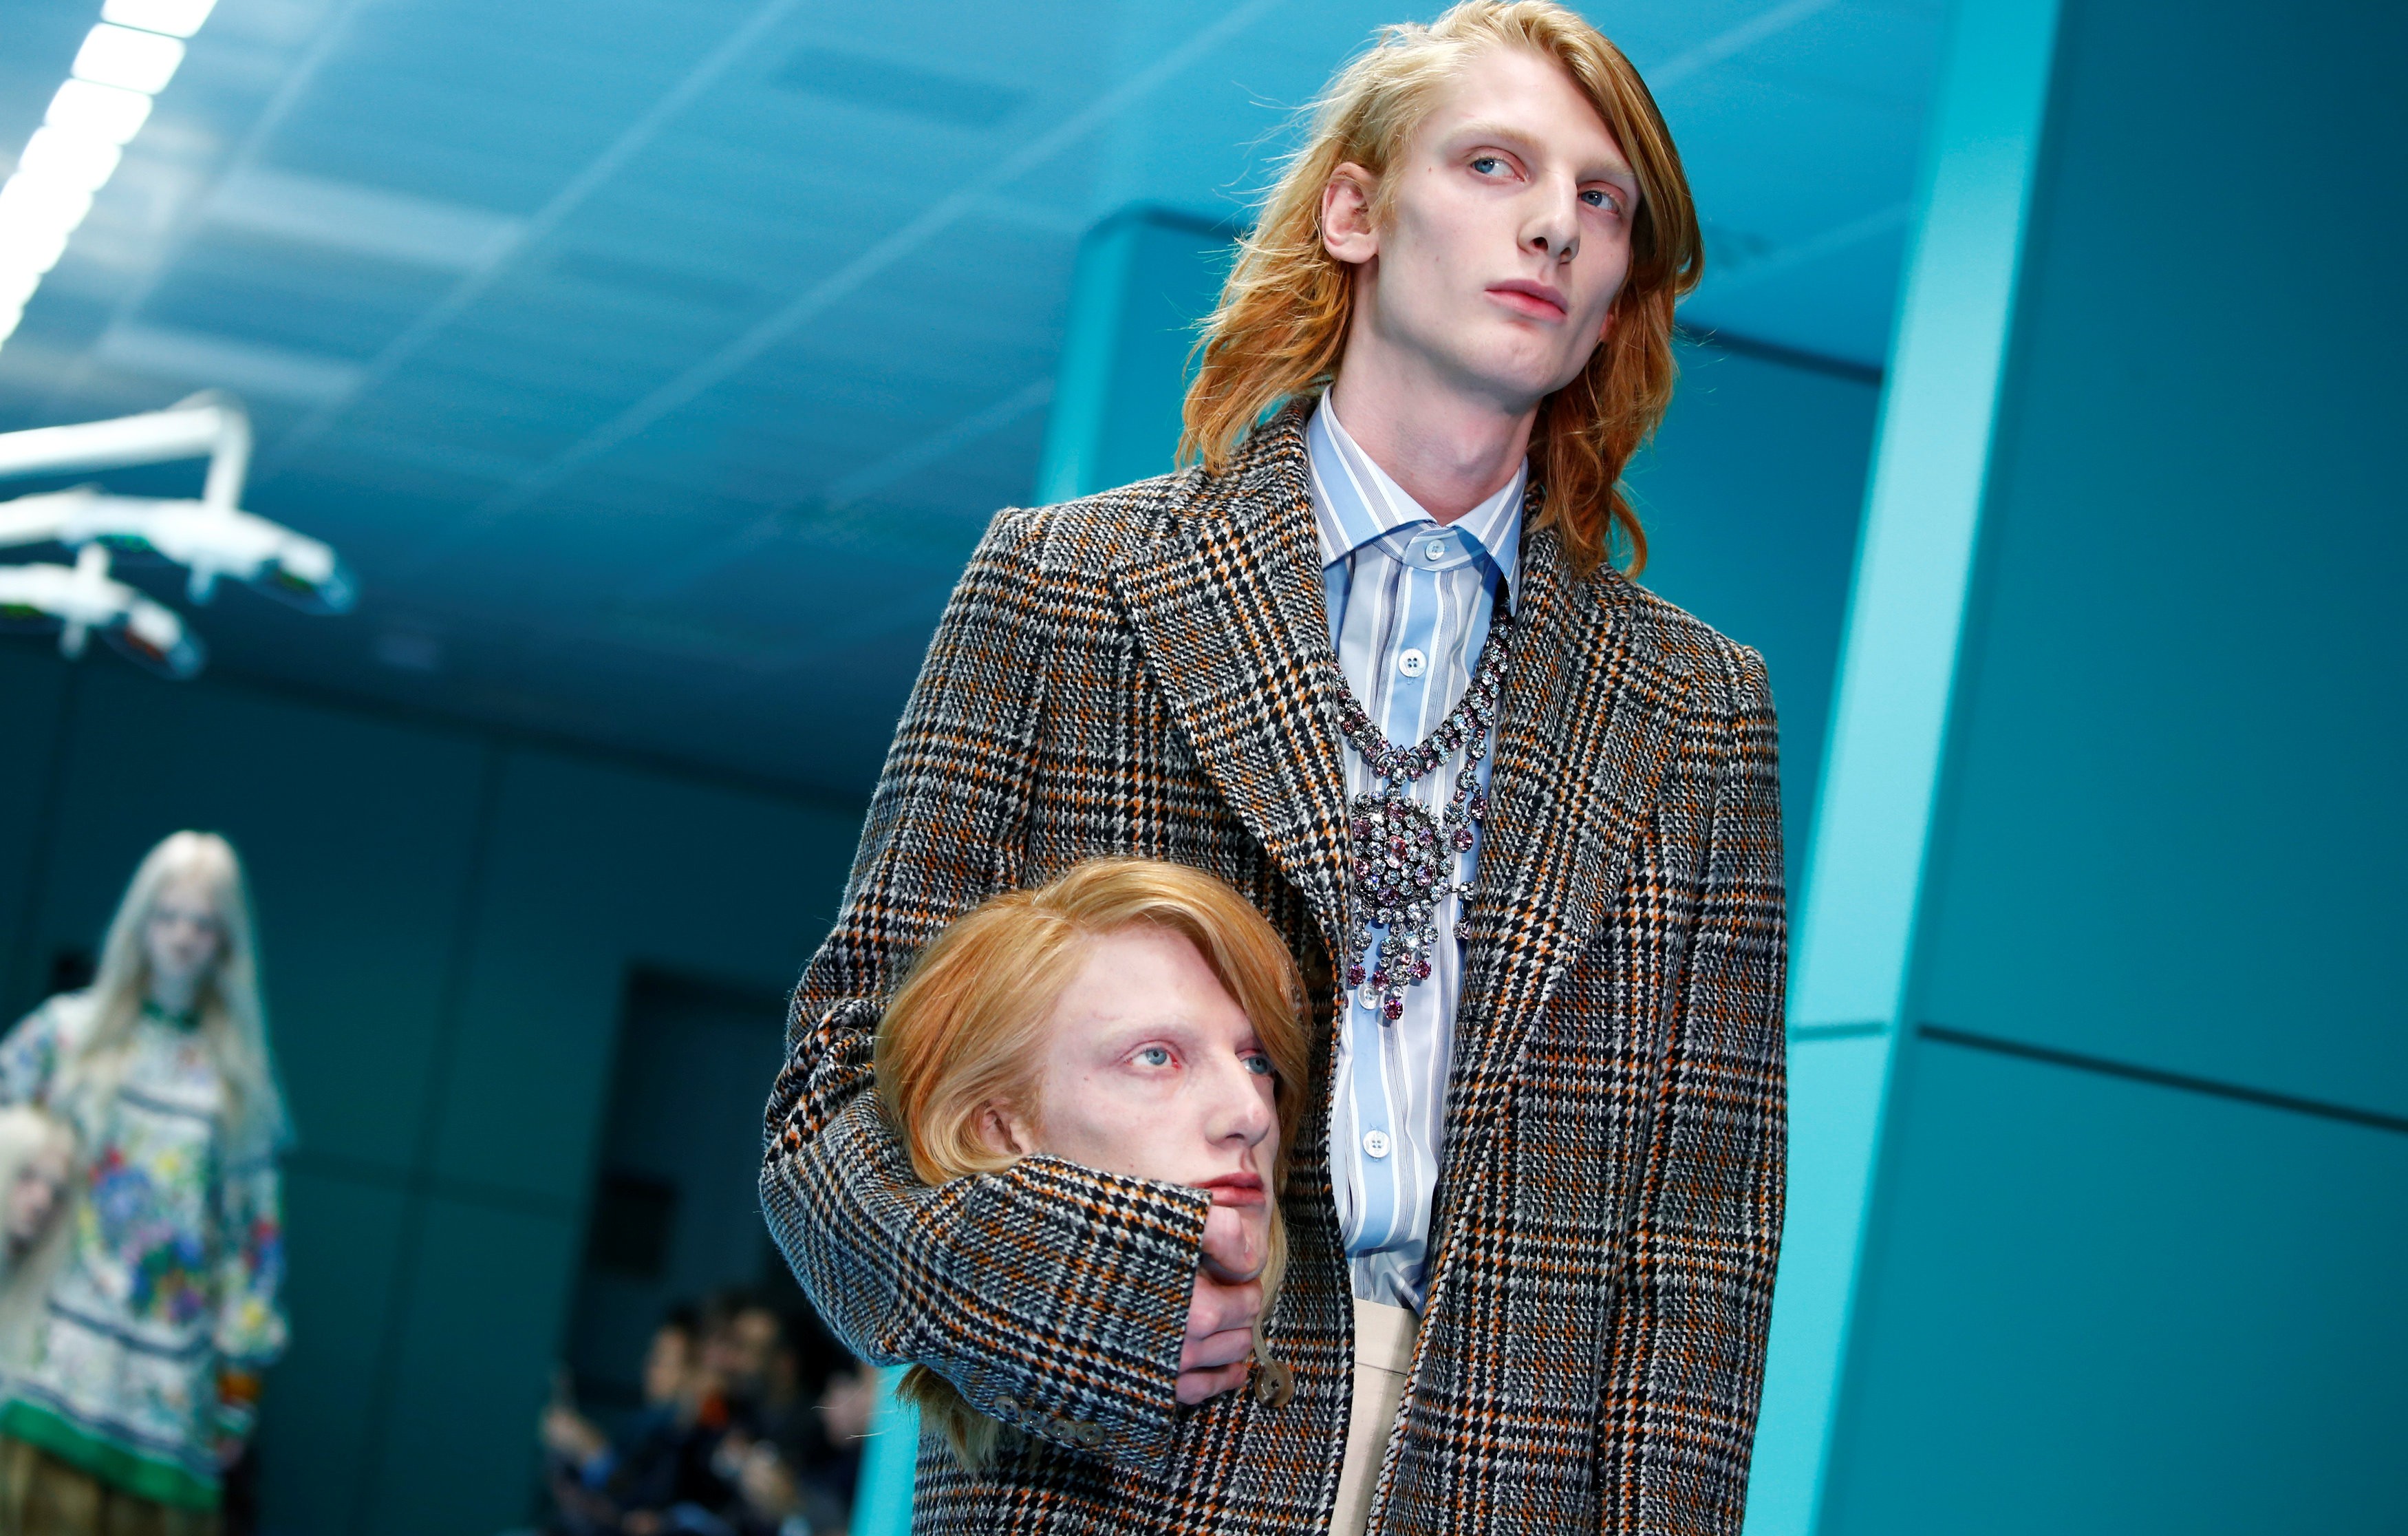 Gucci’s creative director Alessandro Michele use of severed heads on the autumn/winter 2018 runway proved powerful fashion statement